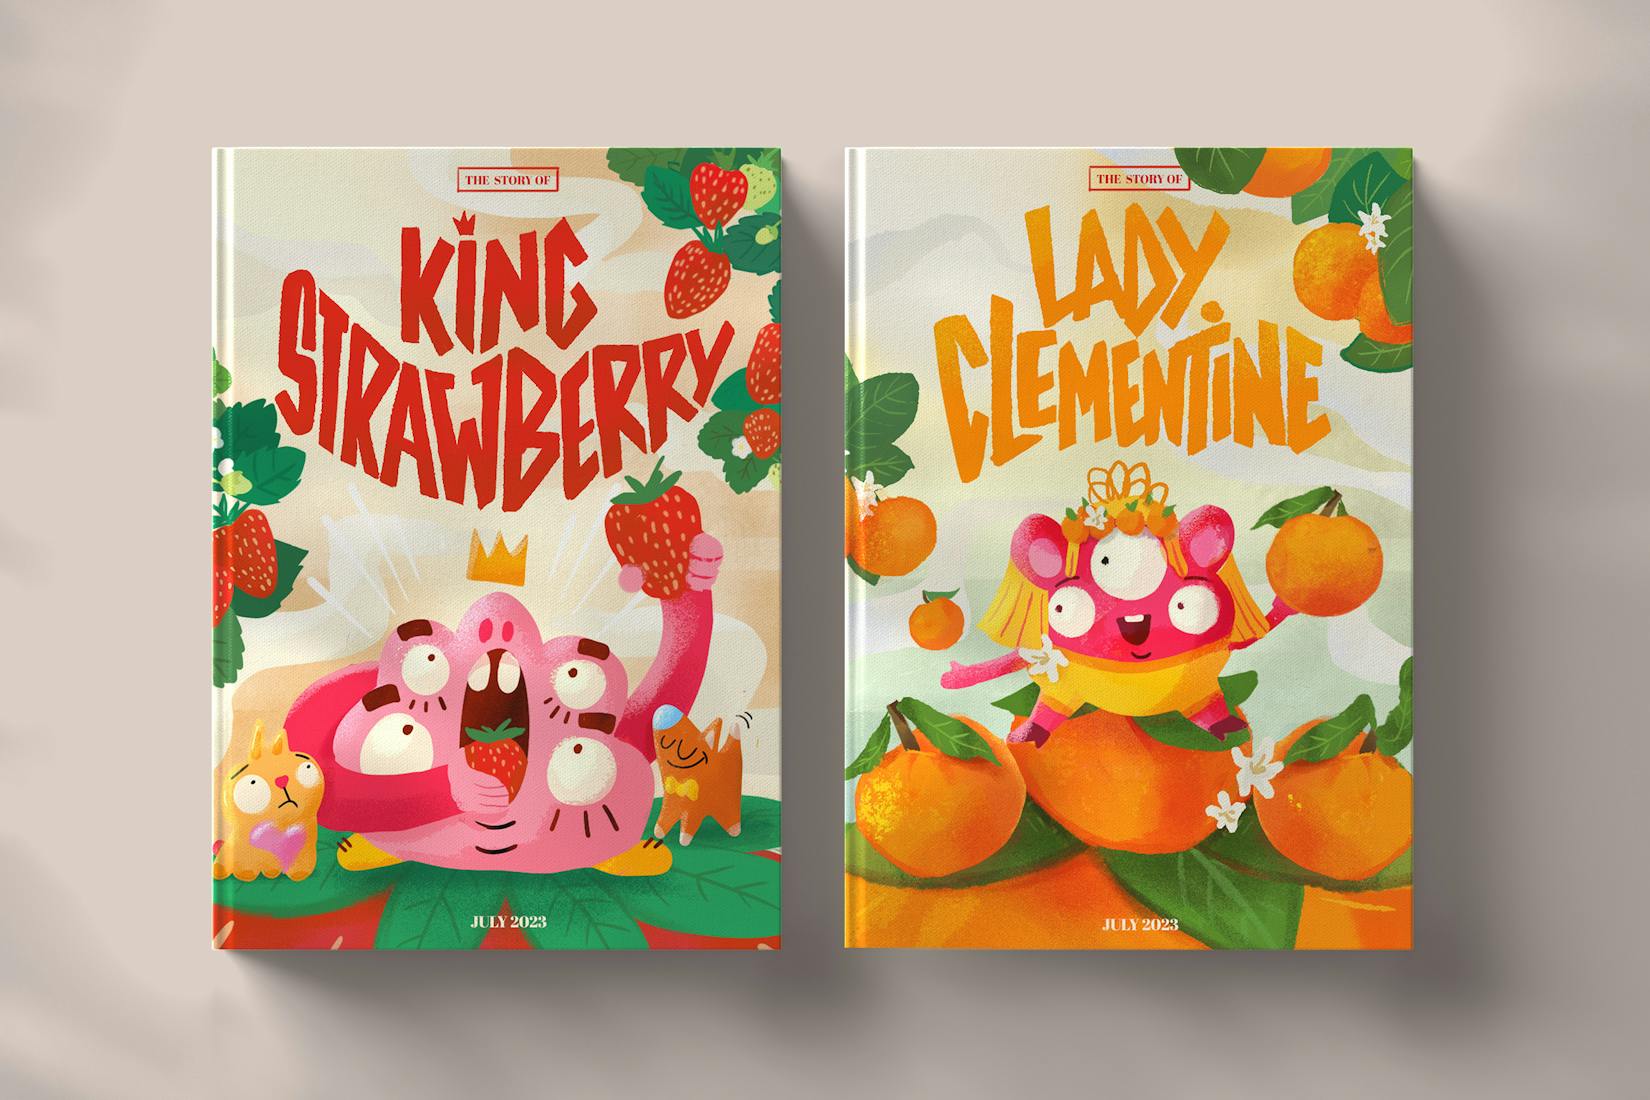 two books illustrated, King strawberry and lady clementine